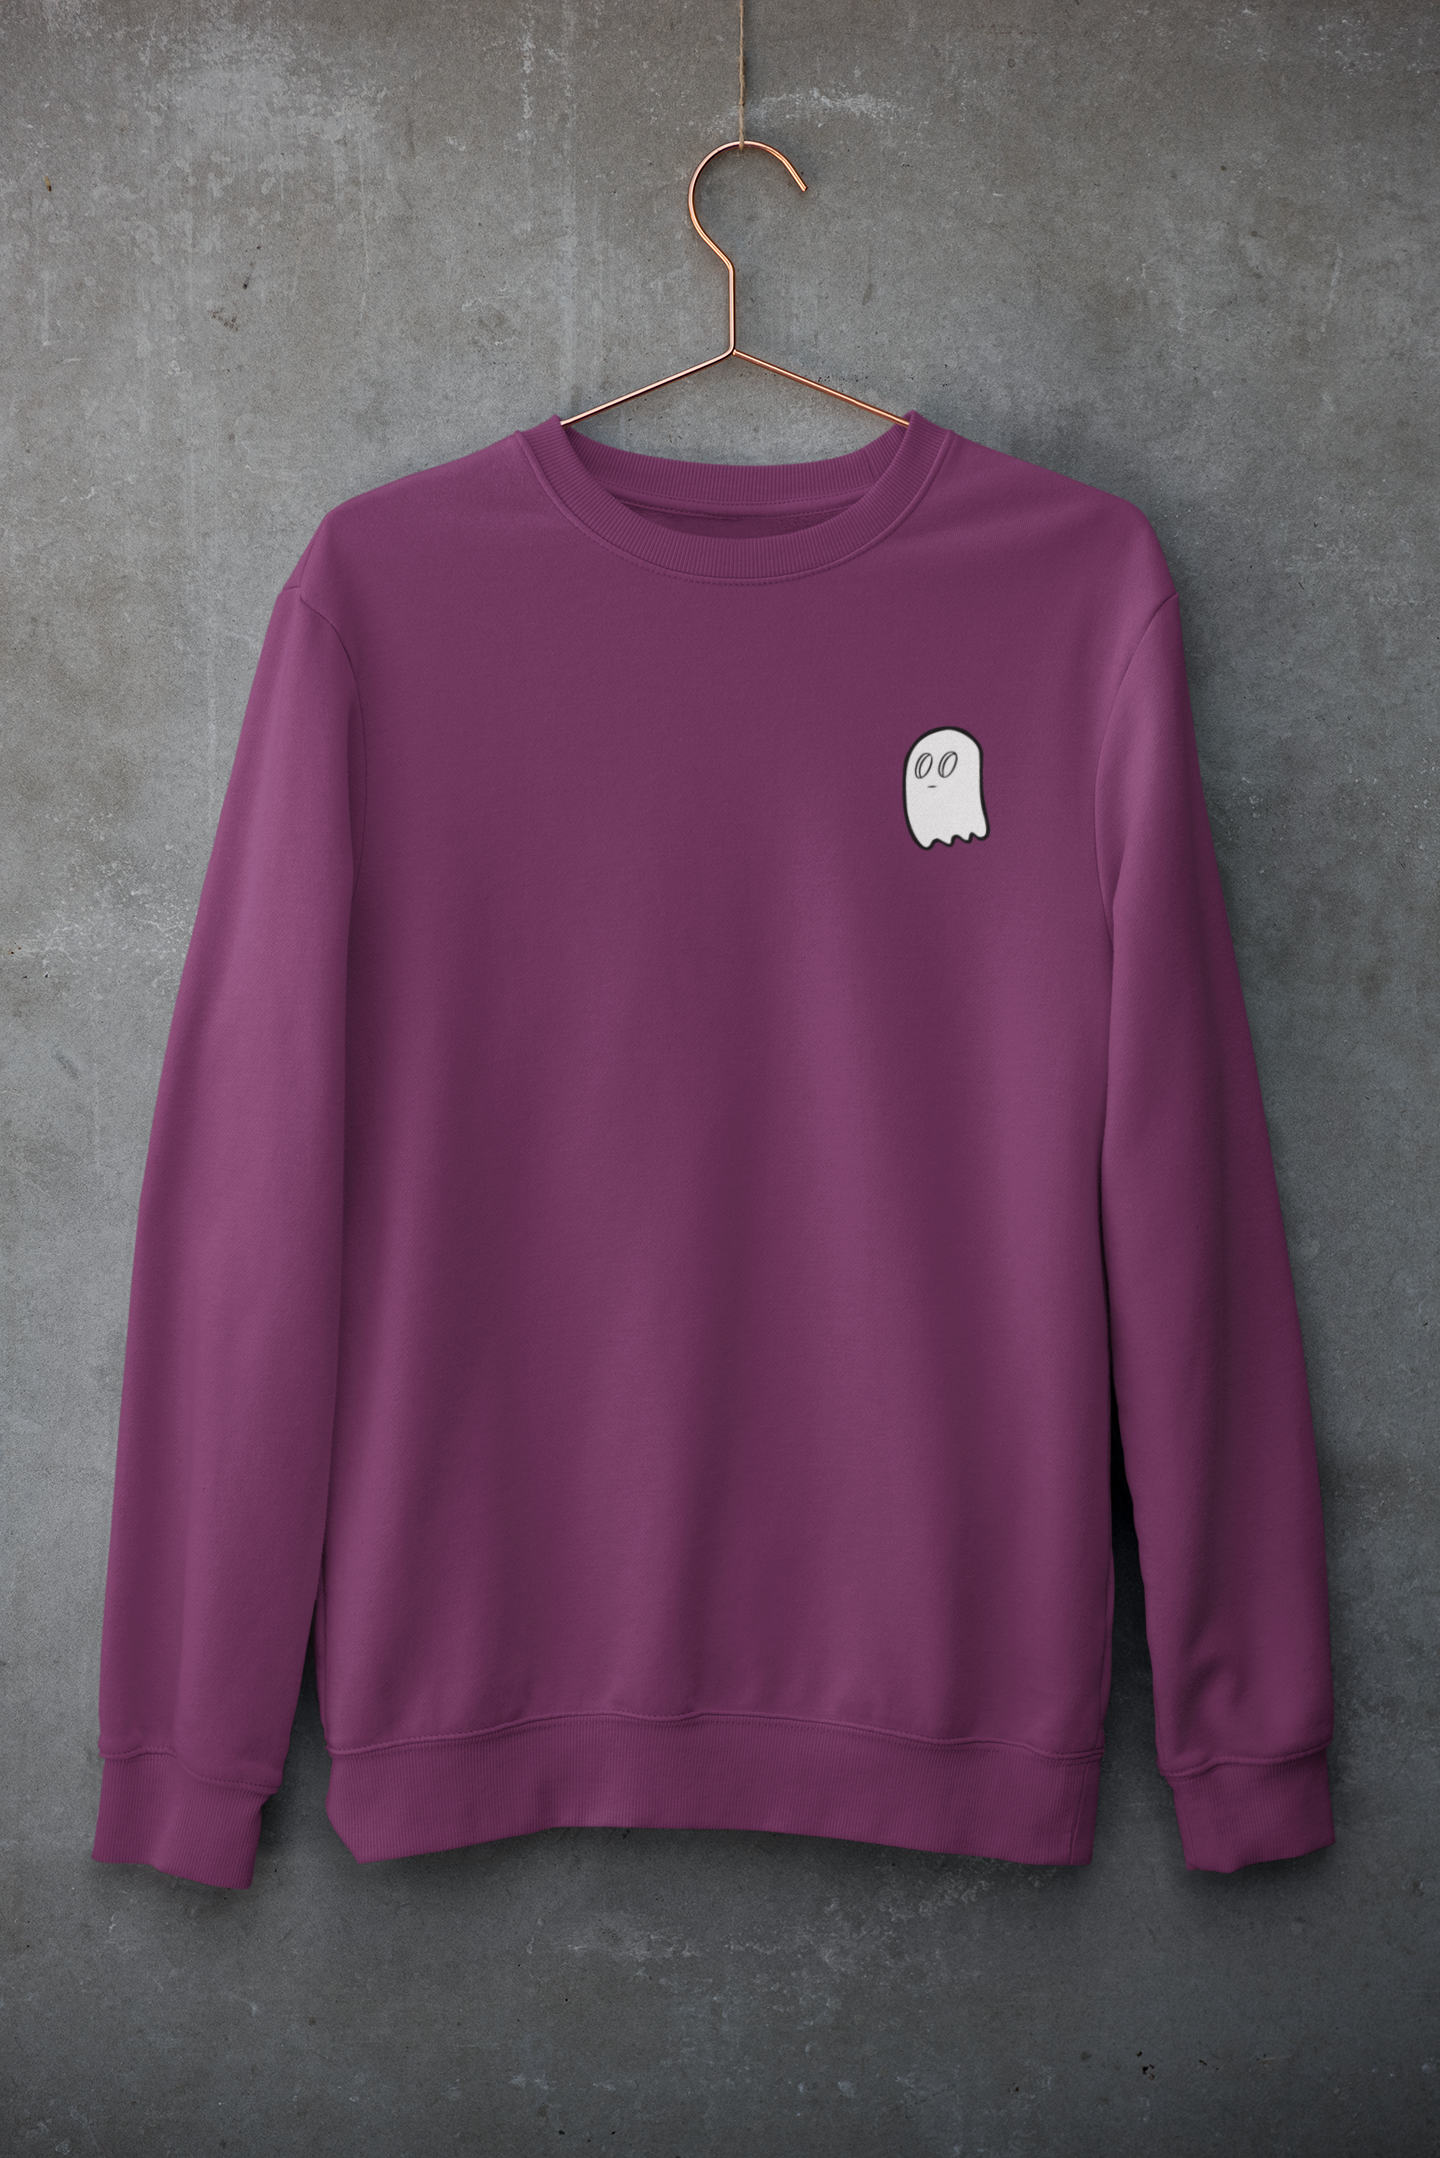 embroidered ghost crewneck maroon